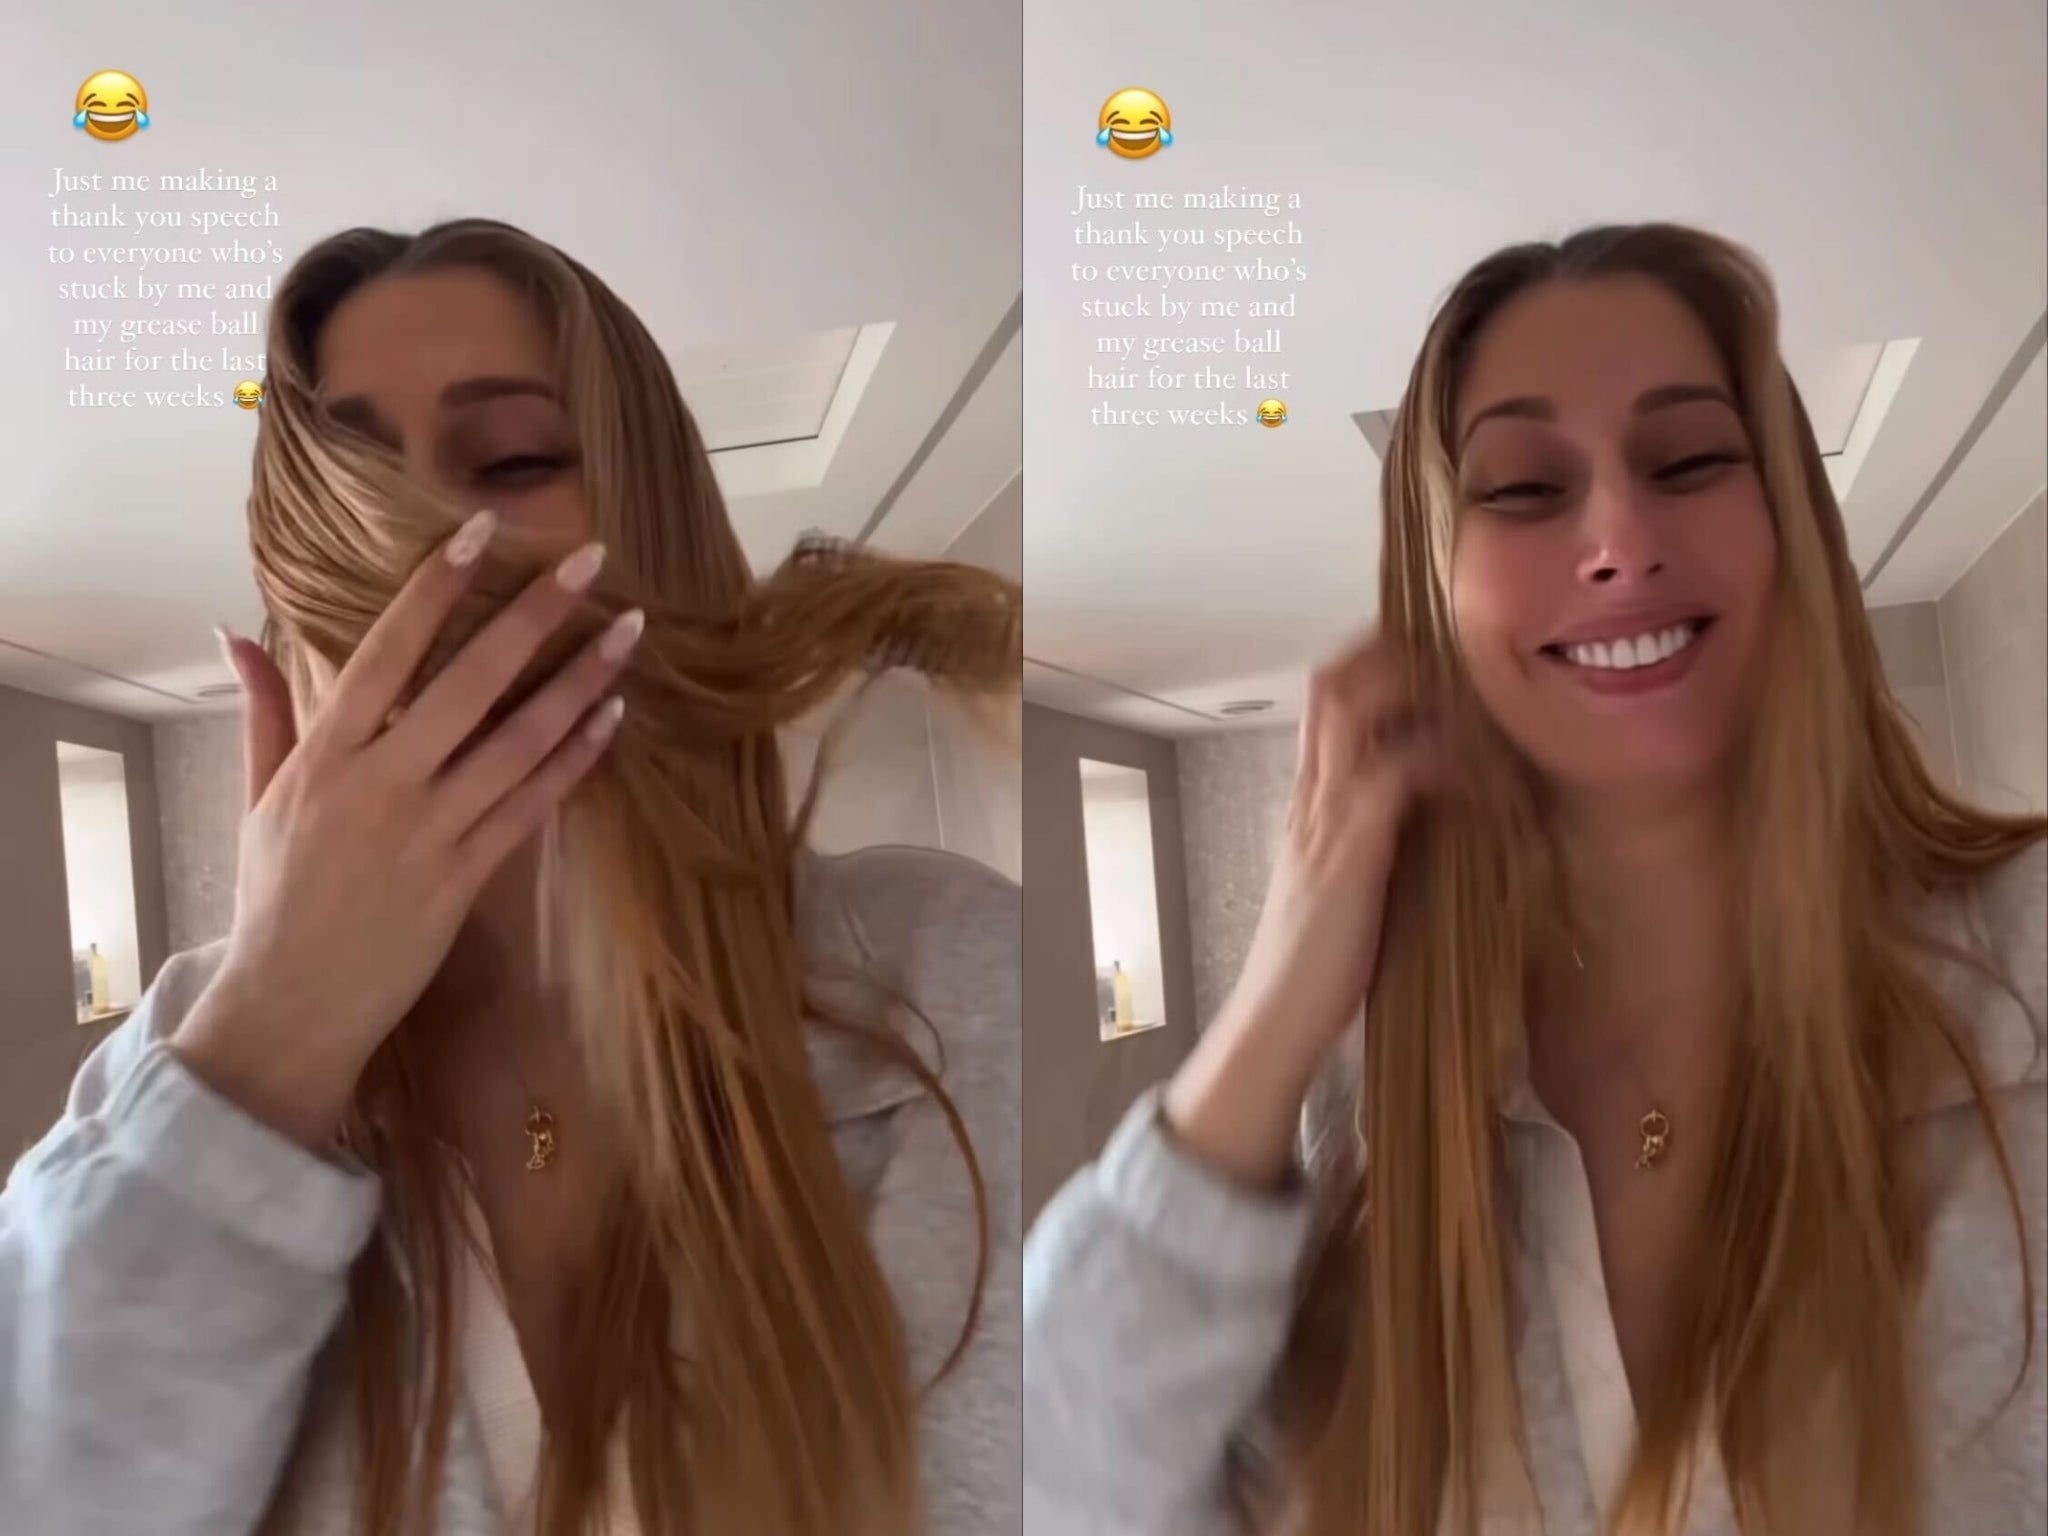 Stacey Solomon reveals she has washed her hair for the first time since giving birth three weeks ago